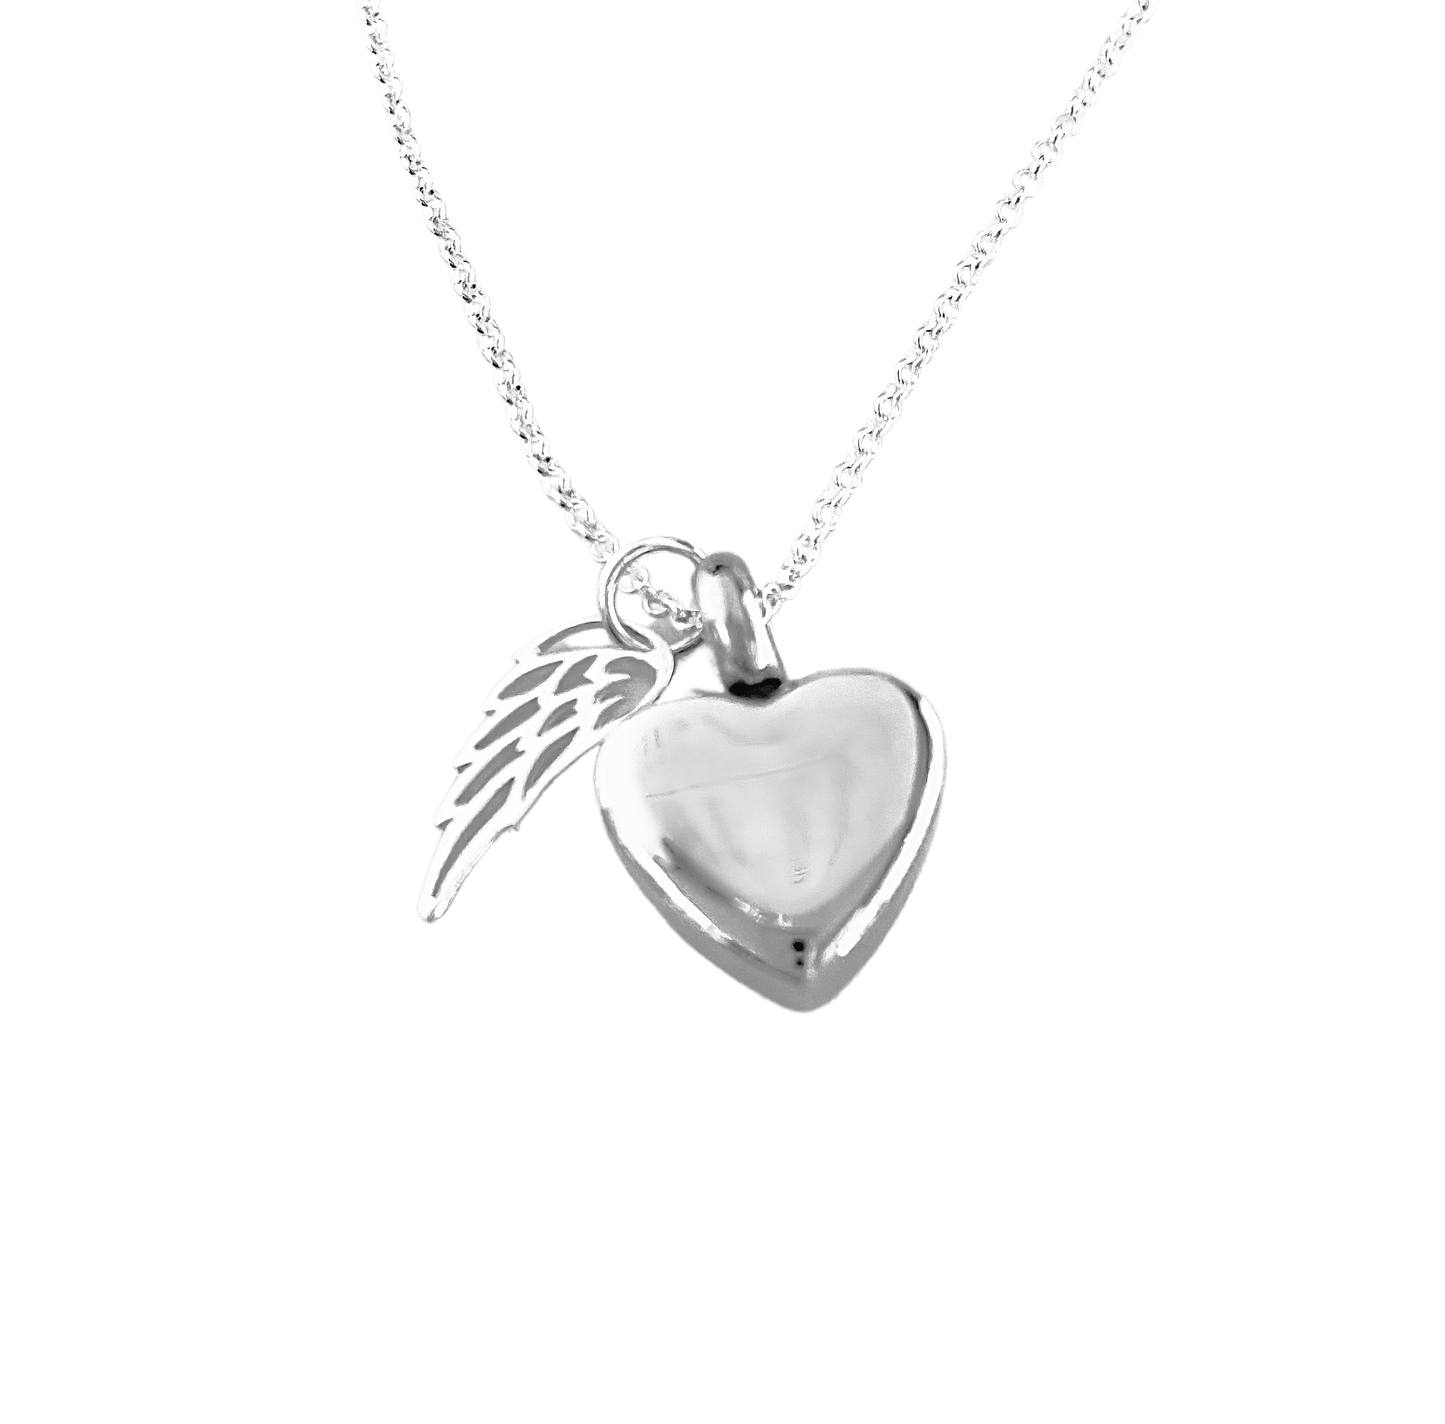 Petite Heart with Silver Angel Wing with Fingerprint